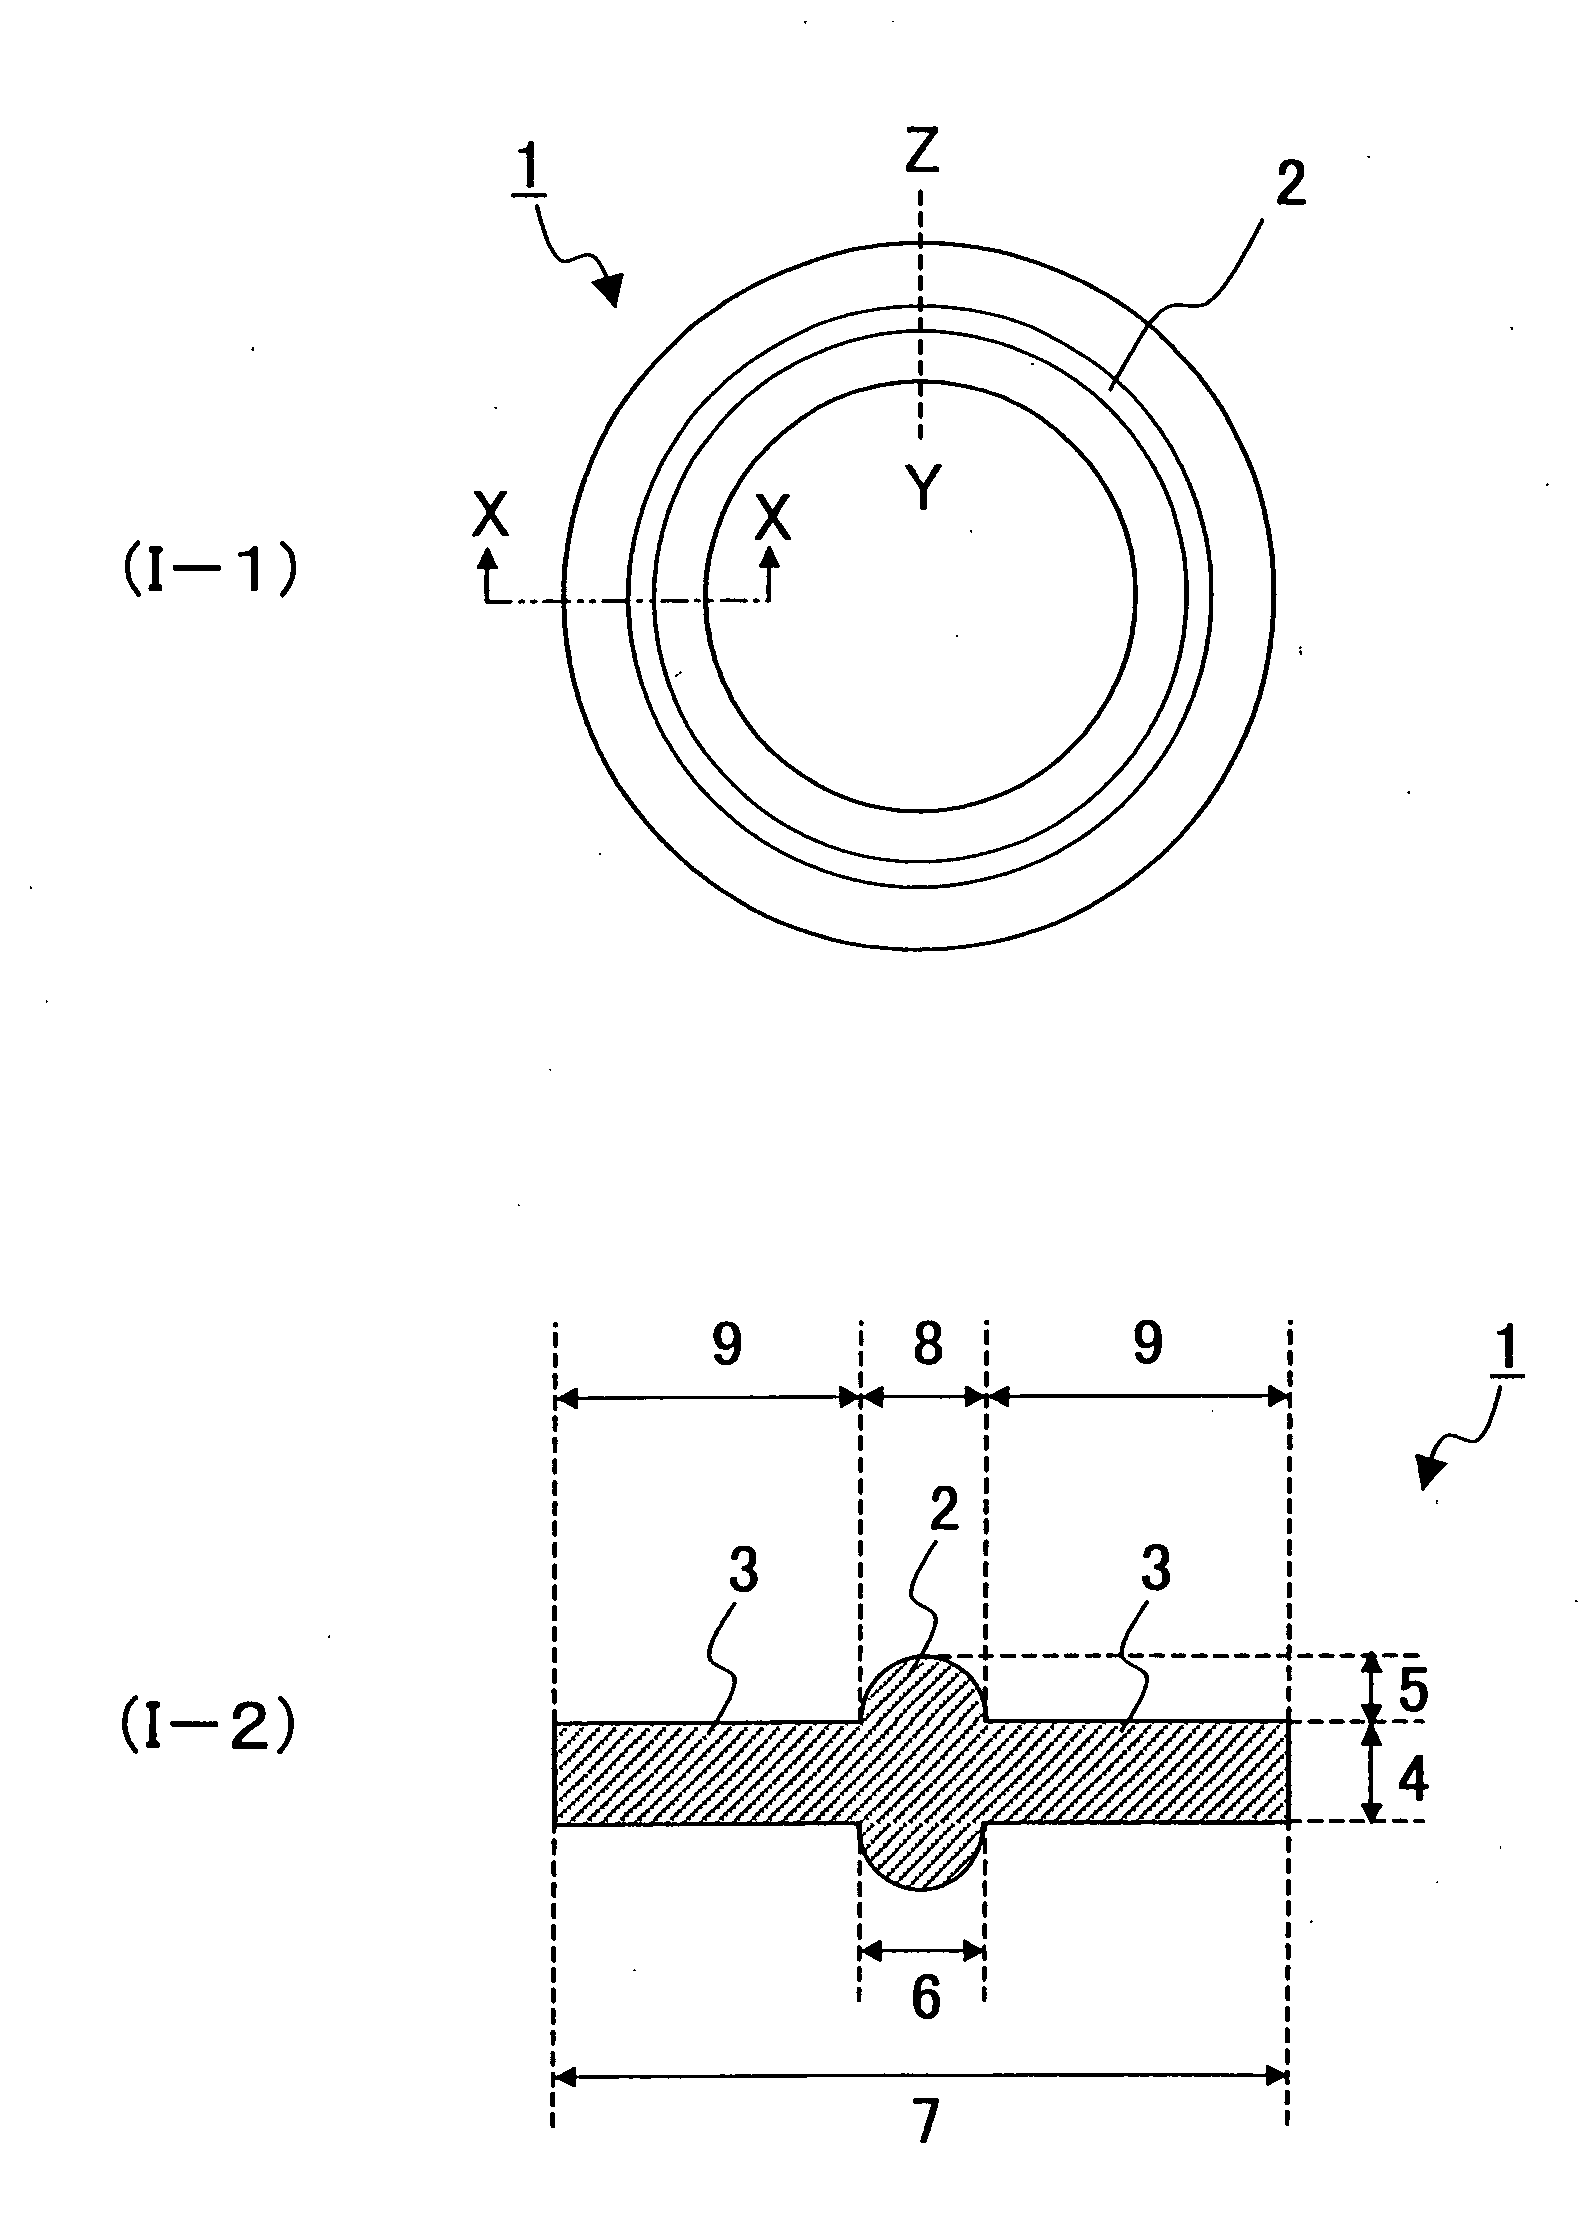 Sheet-like gasket and process for manufacturing same